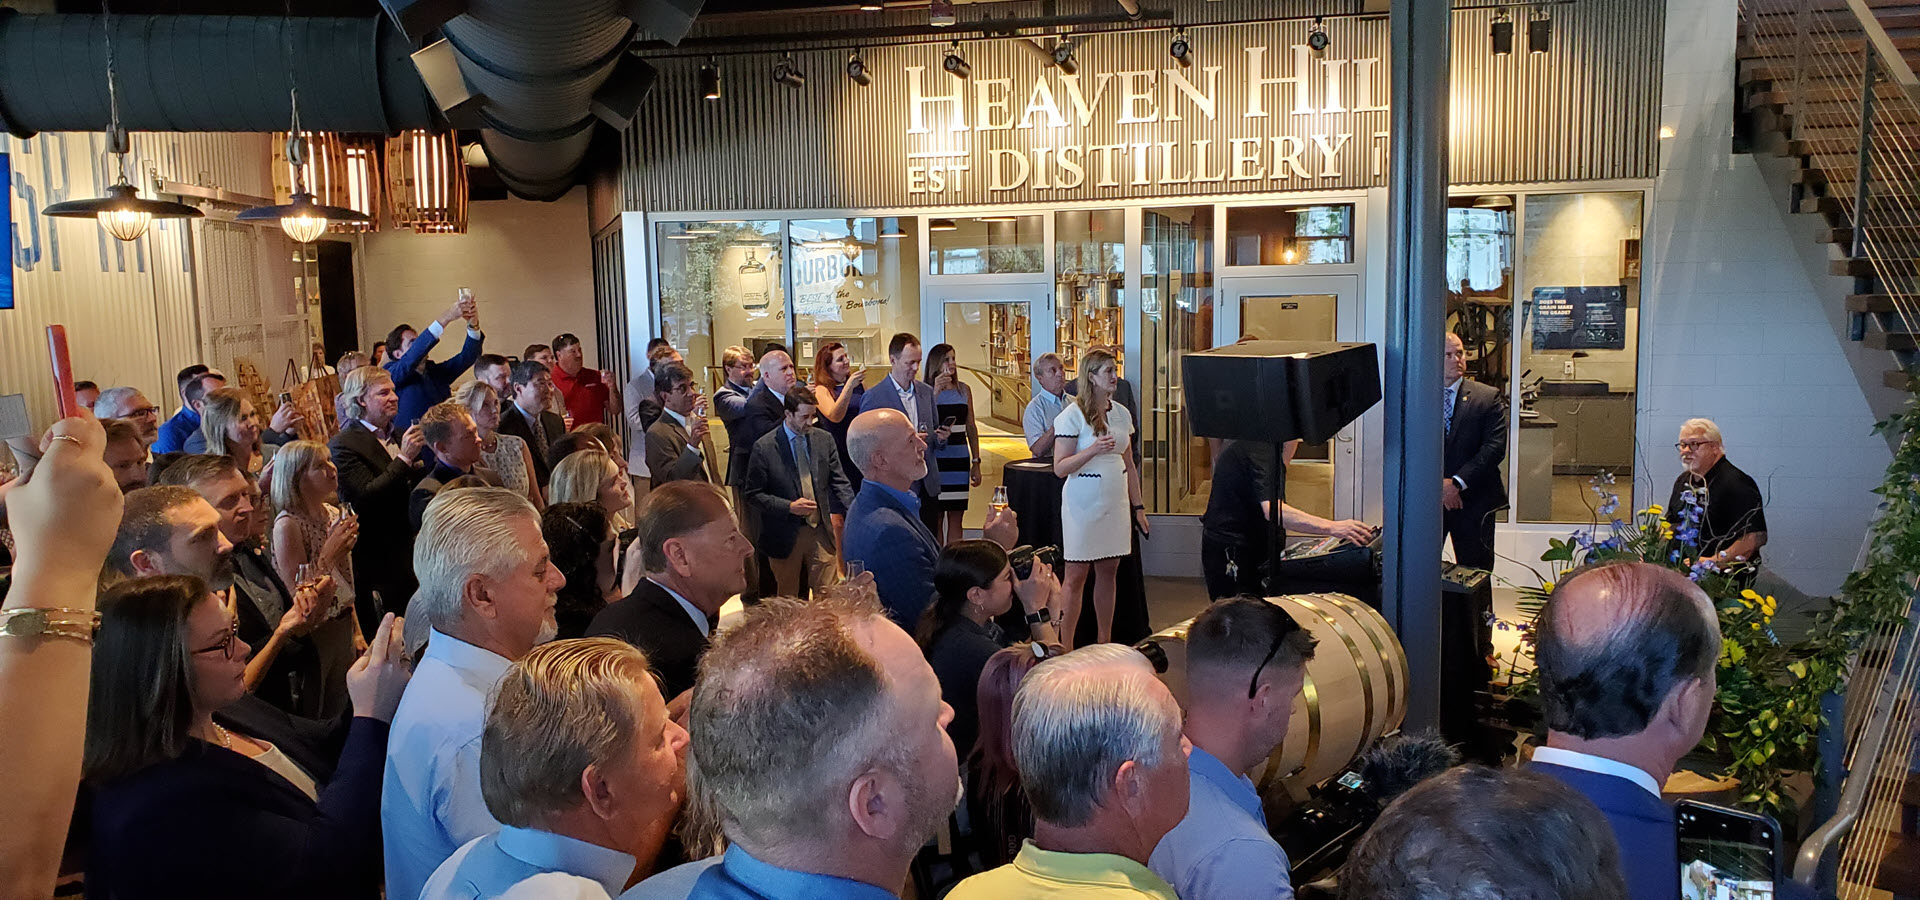 Heaven Hill Bourbon Experience - Grand Opening Crowd